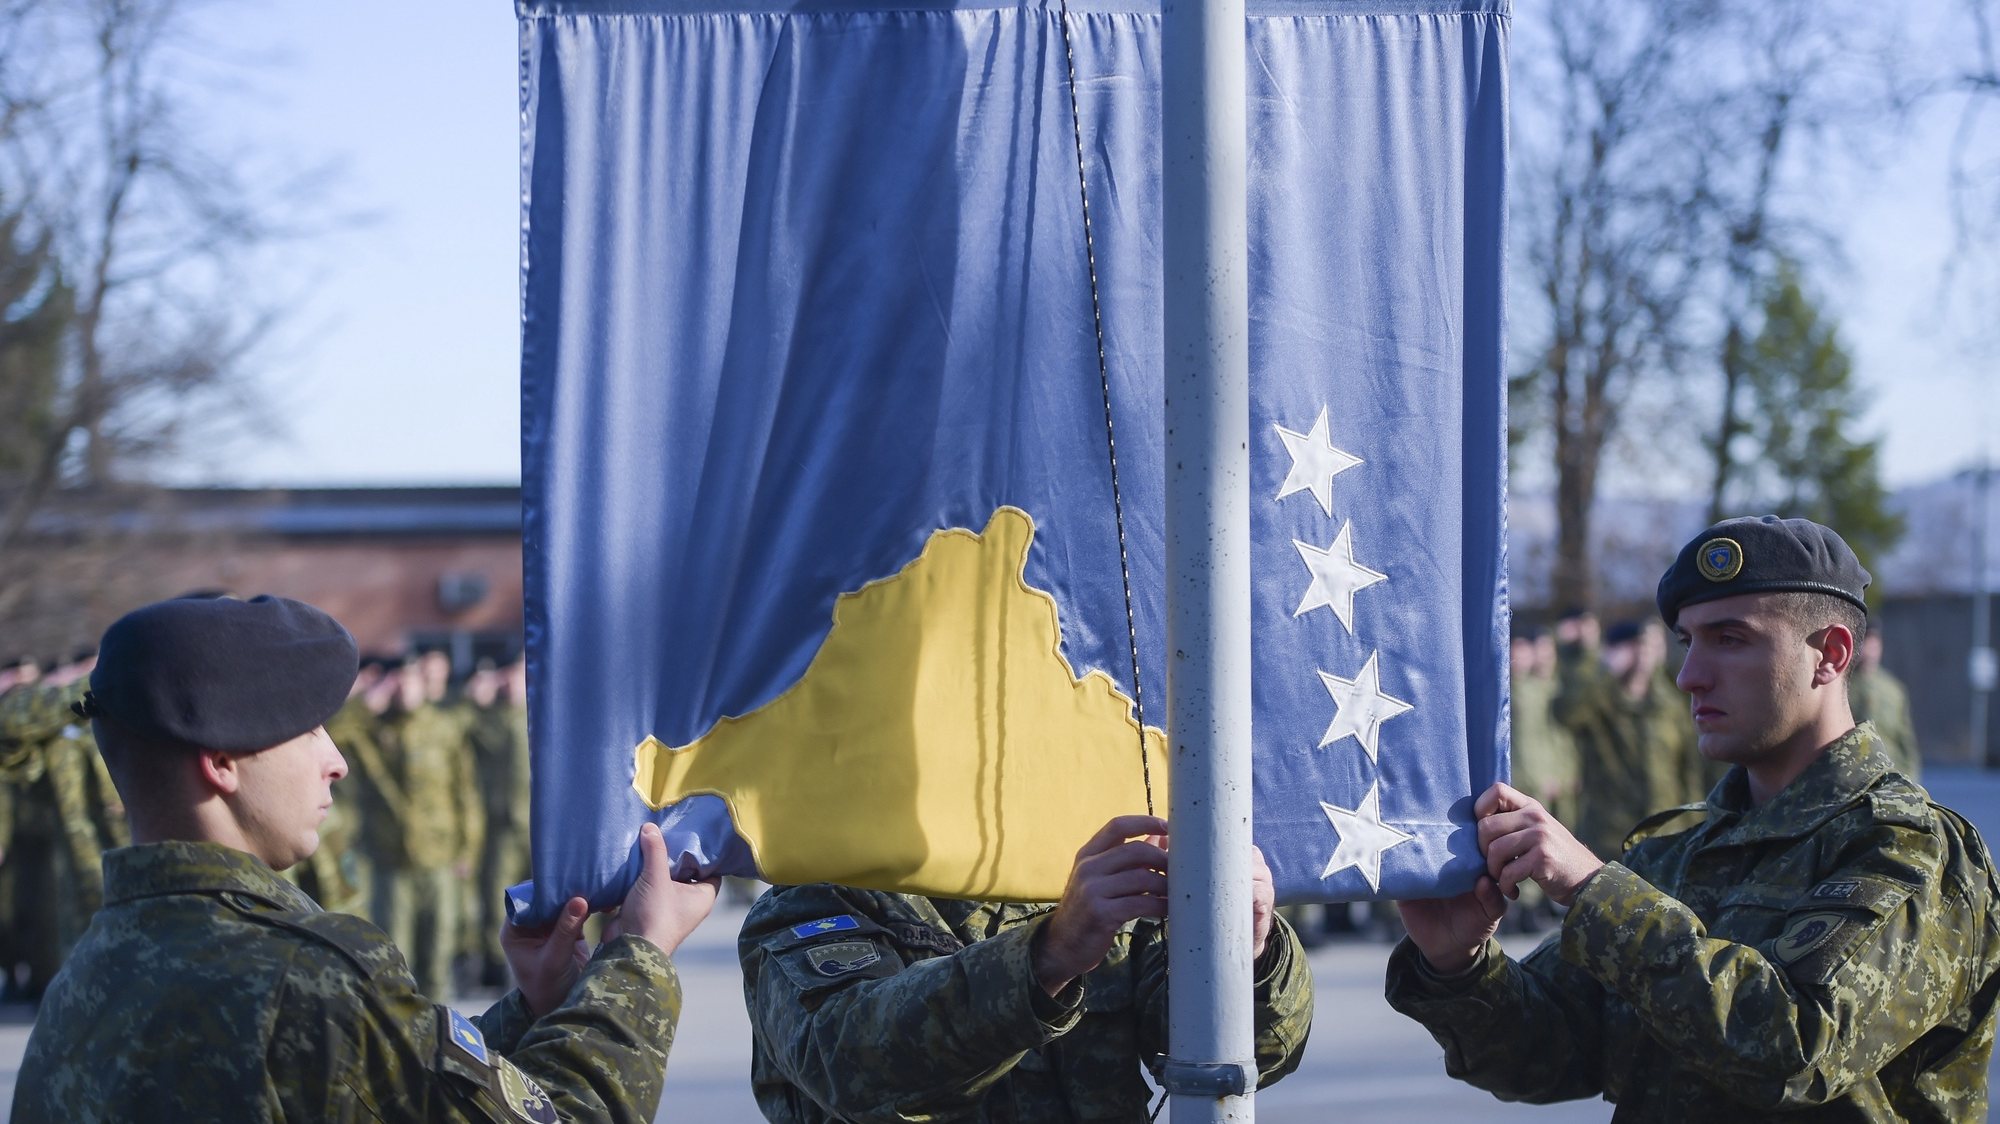 epa07228157 Members of the Kosovo Security Force (KSF) rise the Kosovo national flag before a field training at &#039;New Born&#039; camp in the town of Gjilan, Kosovo, 13 December 2018.  The 120 seat parliament of the Republic of Kosovo is expected to vote for the laws to transform the Security Forces into an official army during the plenary session on 14 December. Parliament in Kosovo, which relies on NATO troops for its protection, voted on 18 October 2018 to set up a 5,000-strong national army though its Serb minority said the move was illegal.  EPA/STRINGER